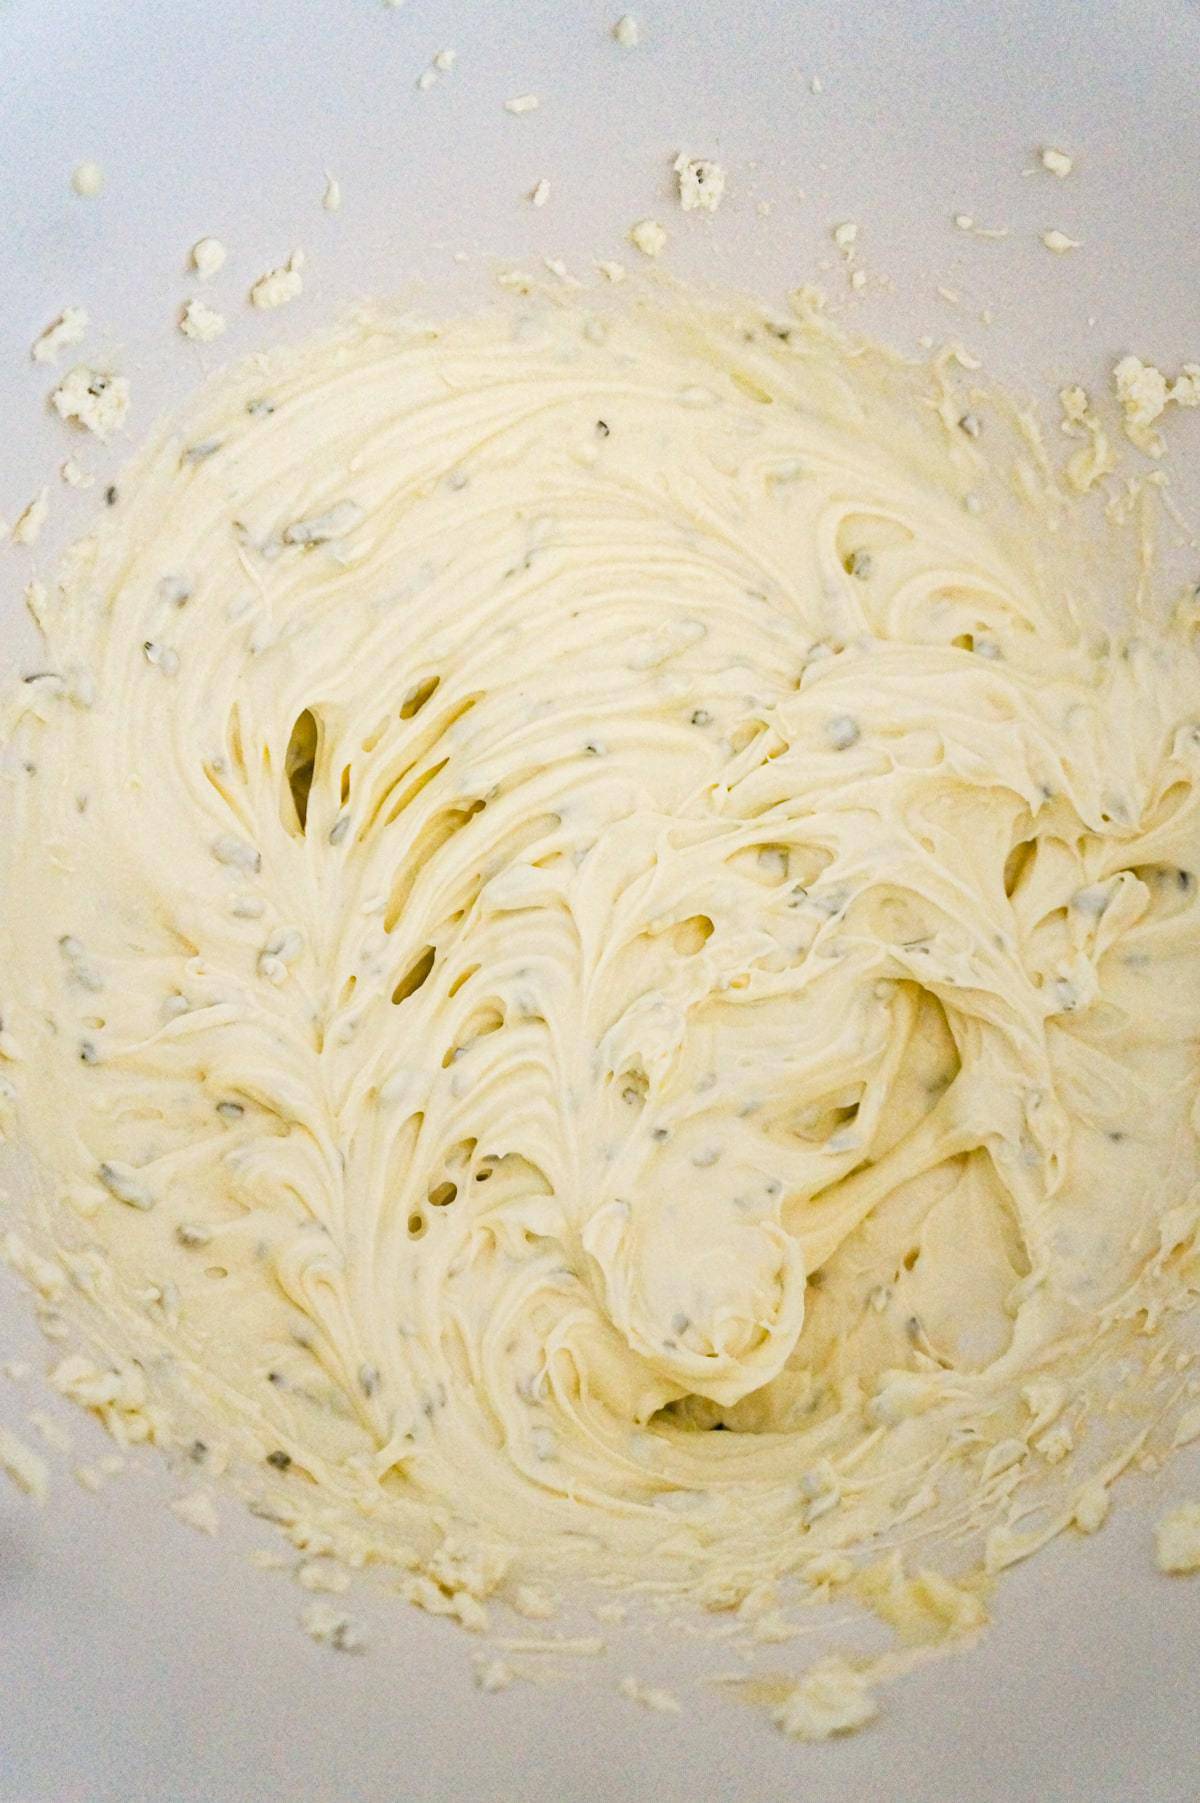 mayo and cream cheese mixture in a mixing bowl